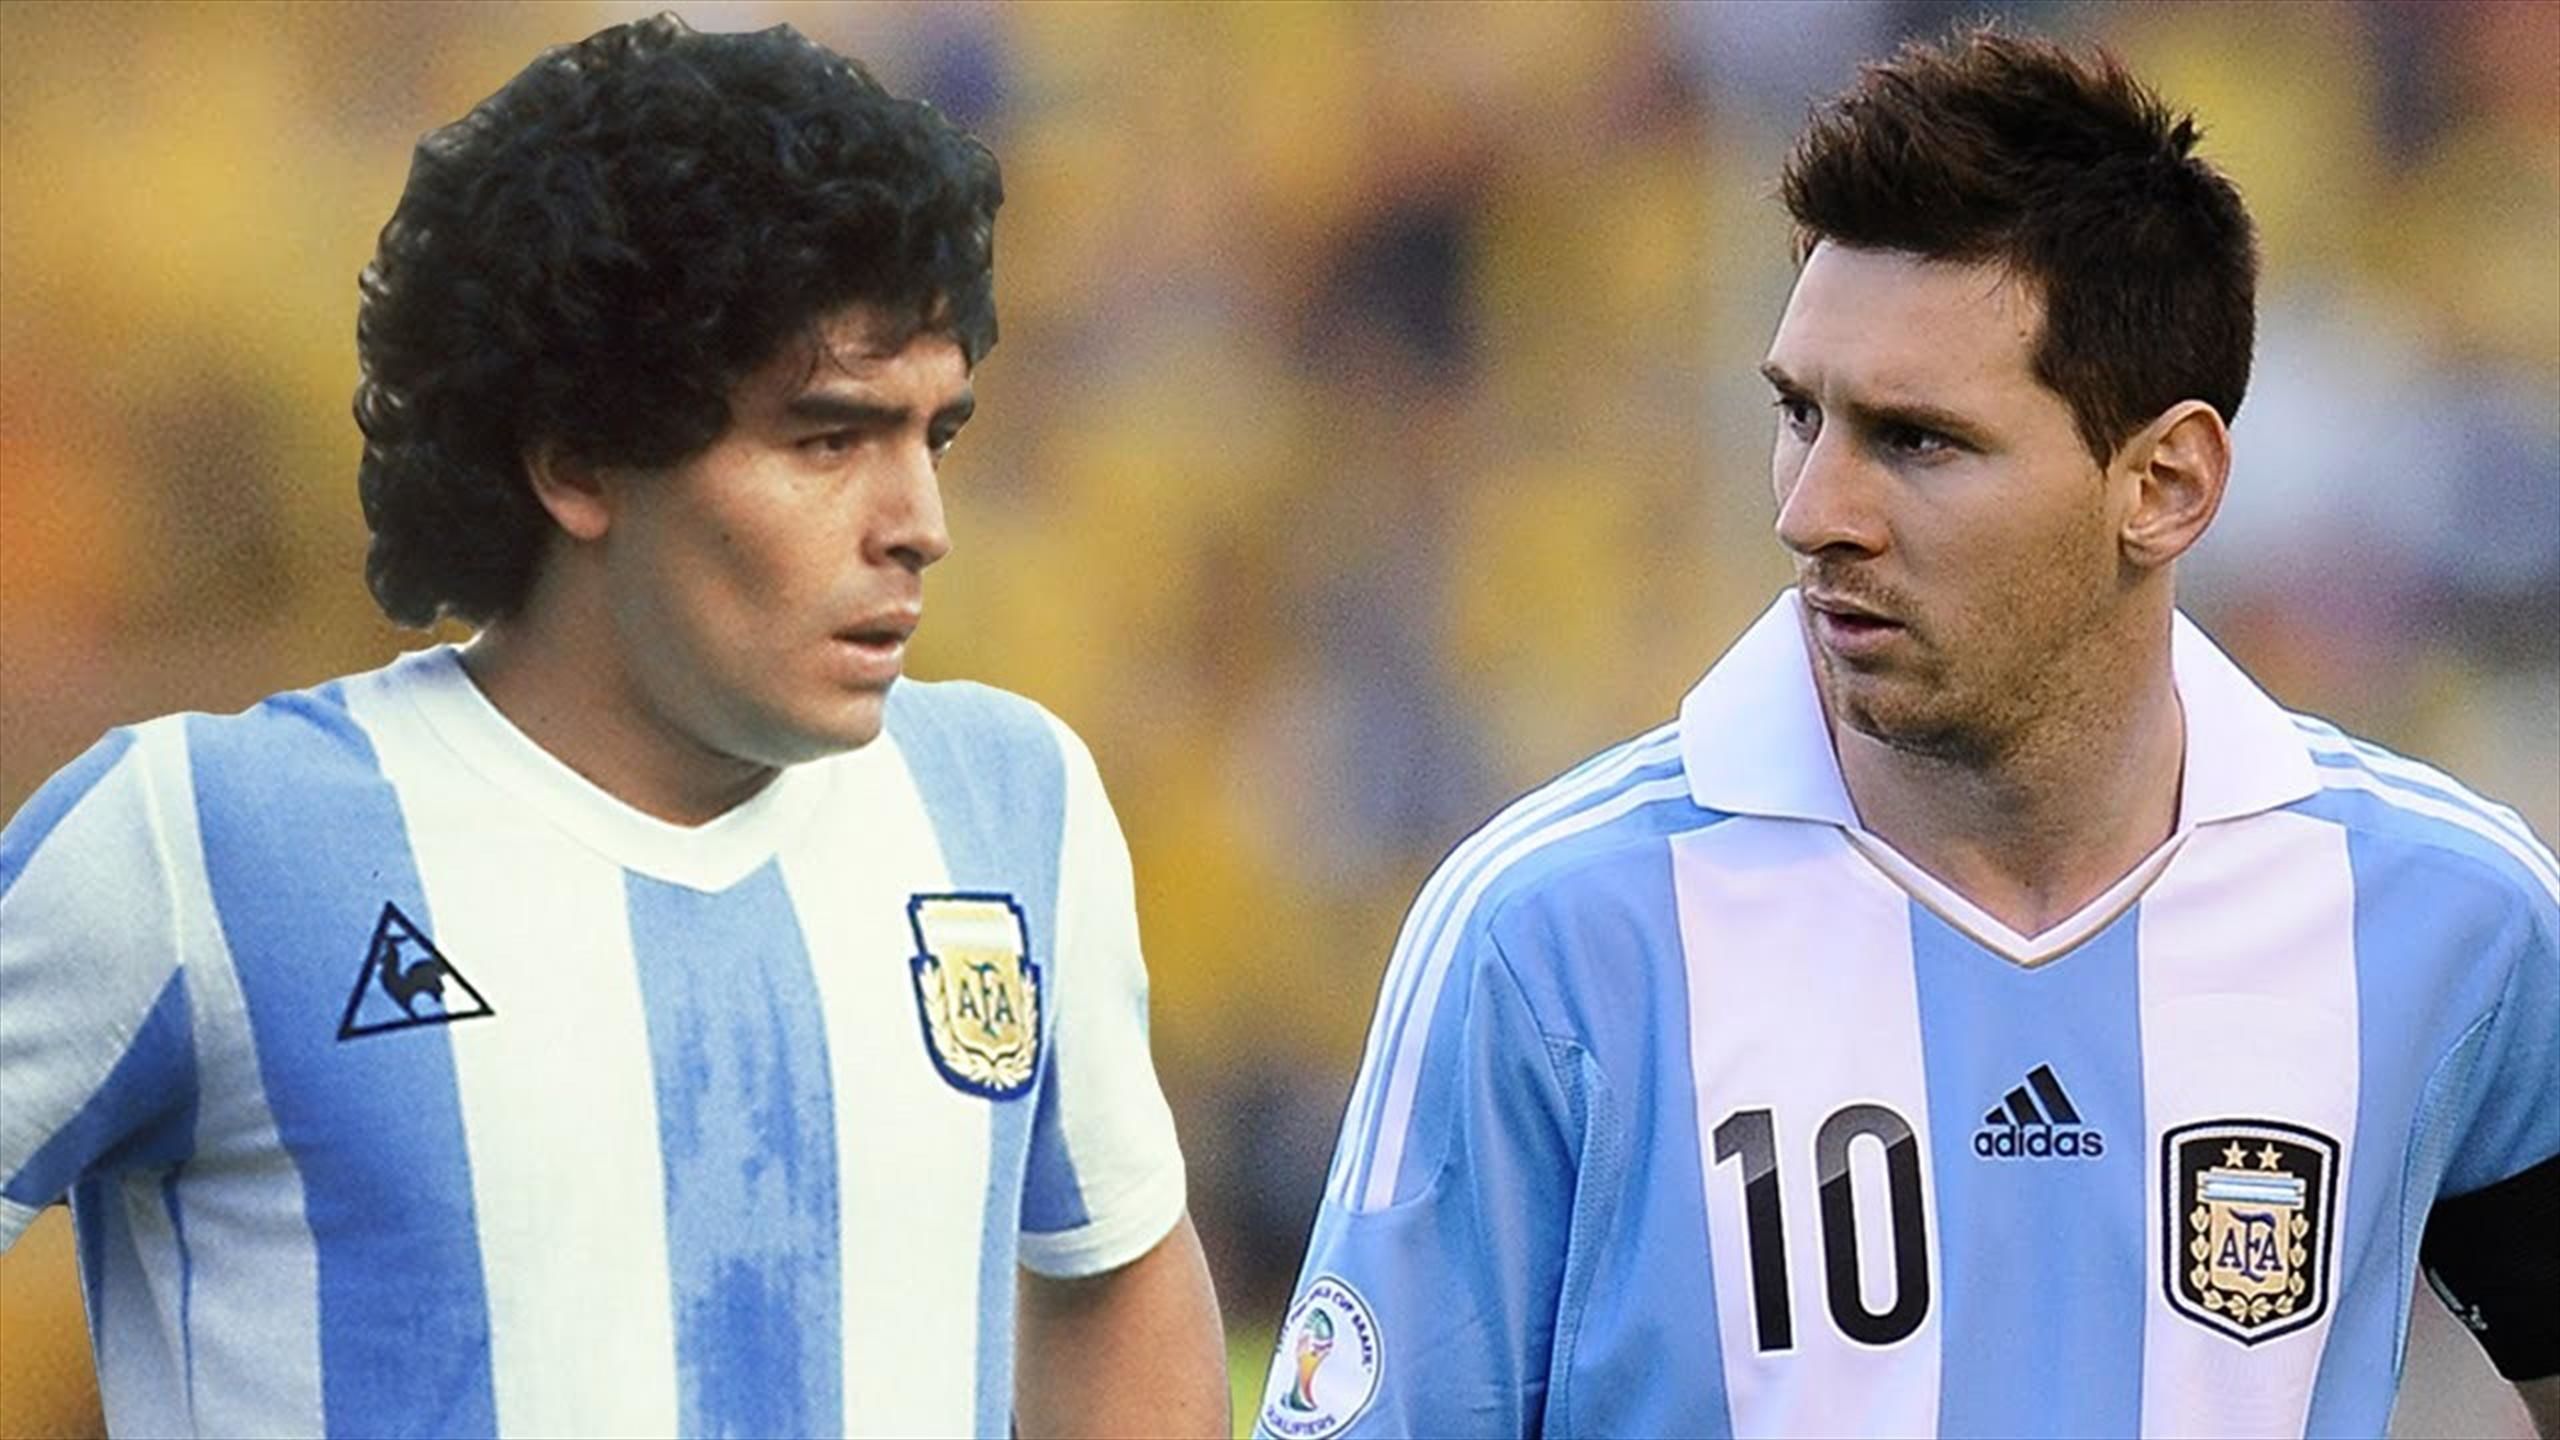 Messi is sure that Maradona would be very happy to have his record broken at the World Cup